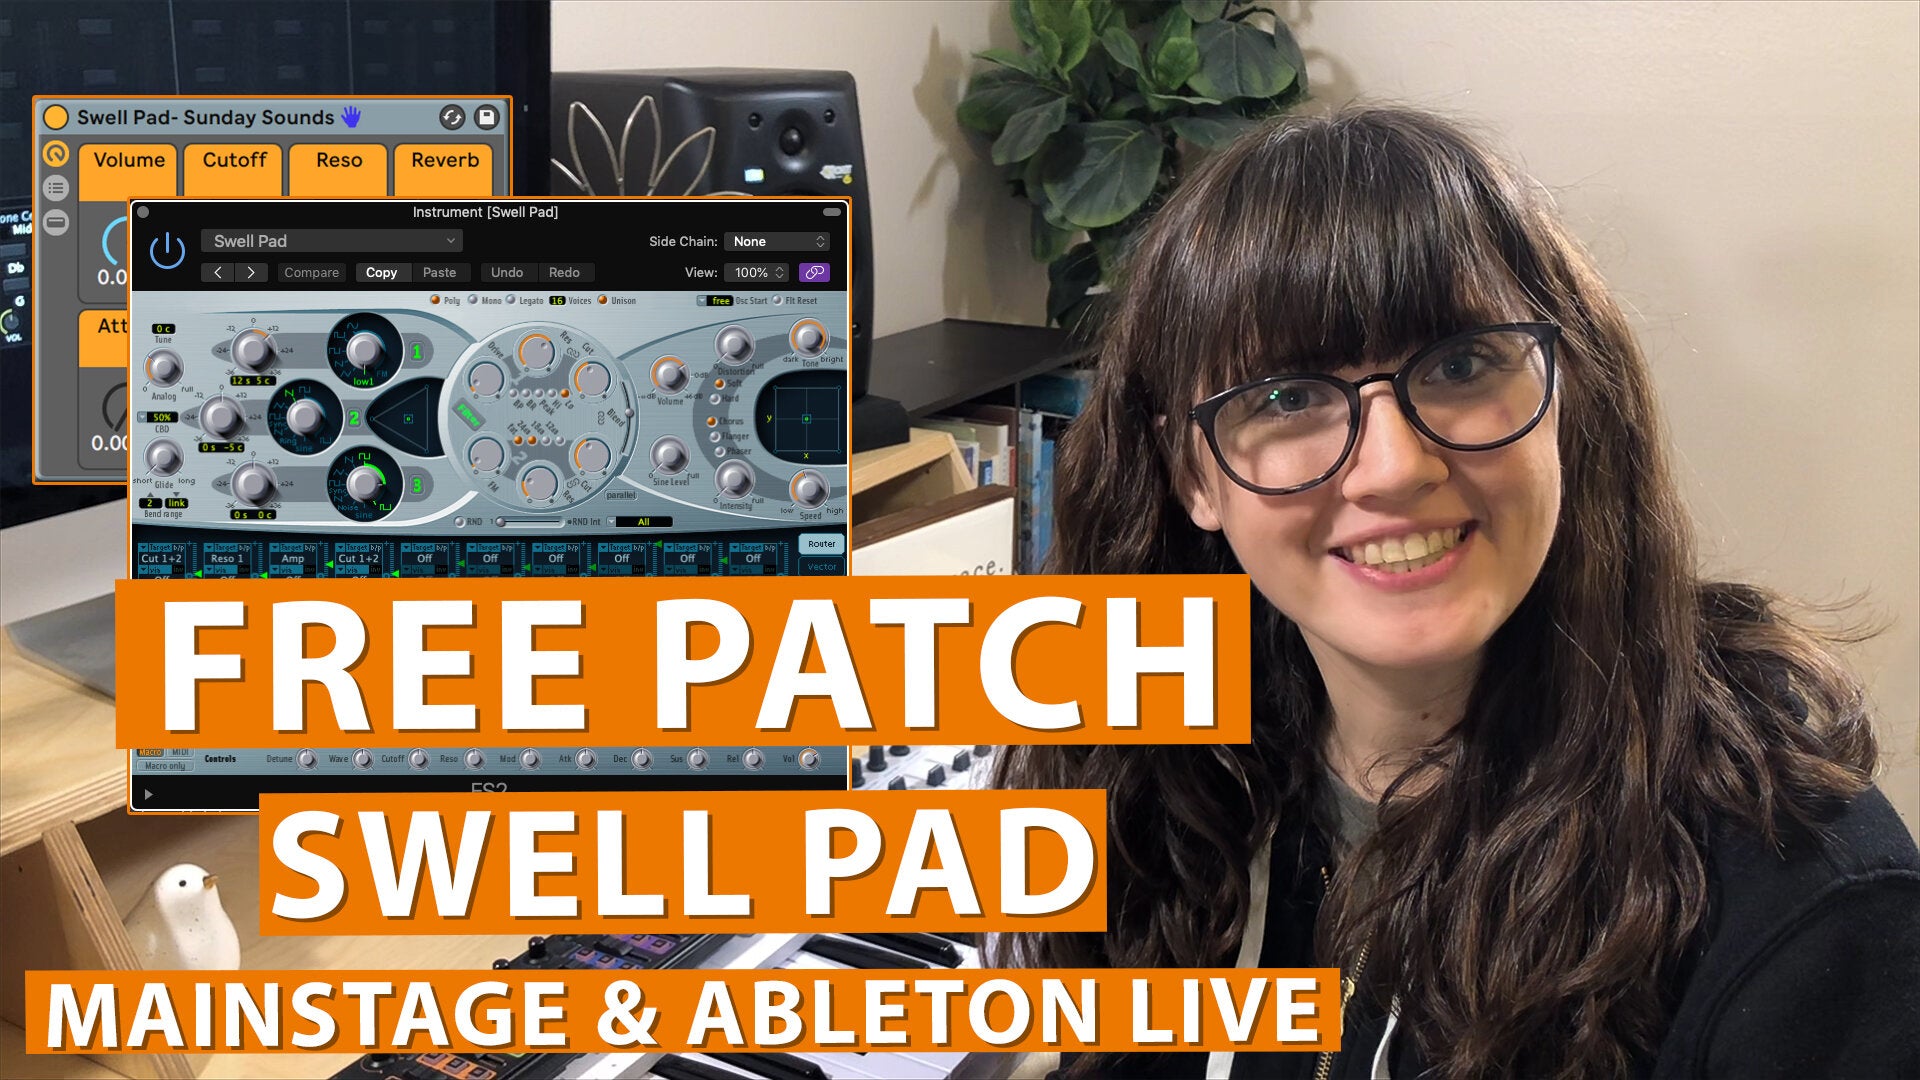 Free MainStage & Ableton Worship Patch! - Swell Pad